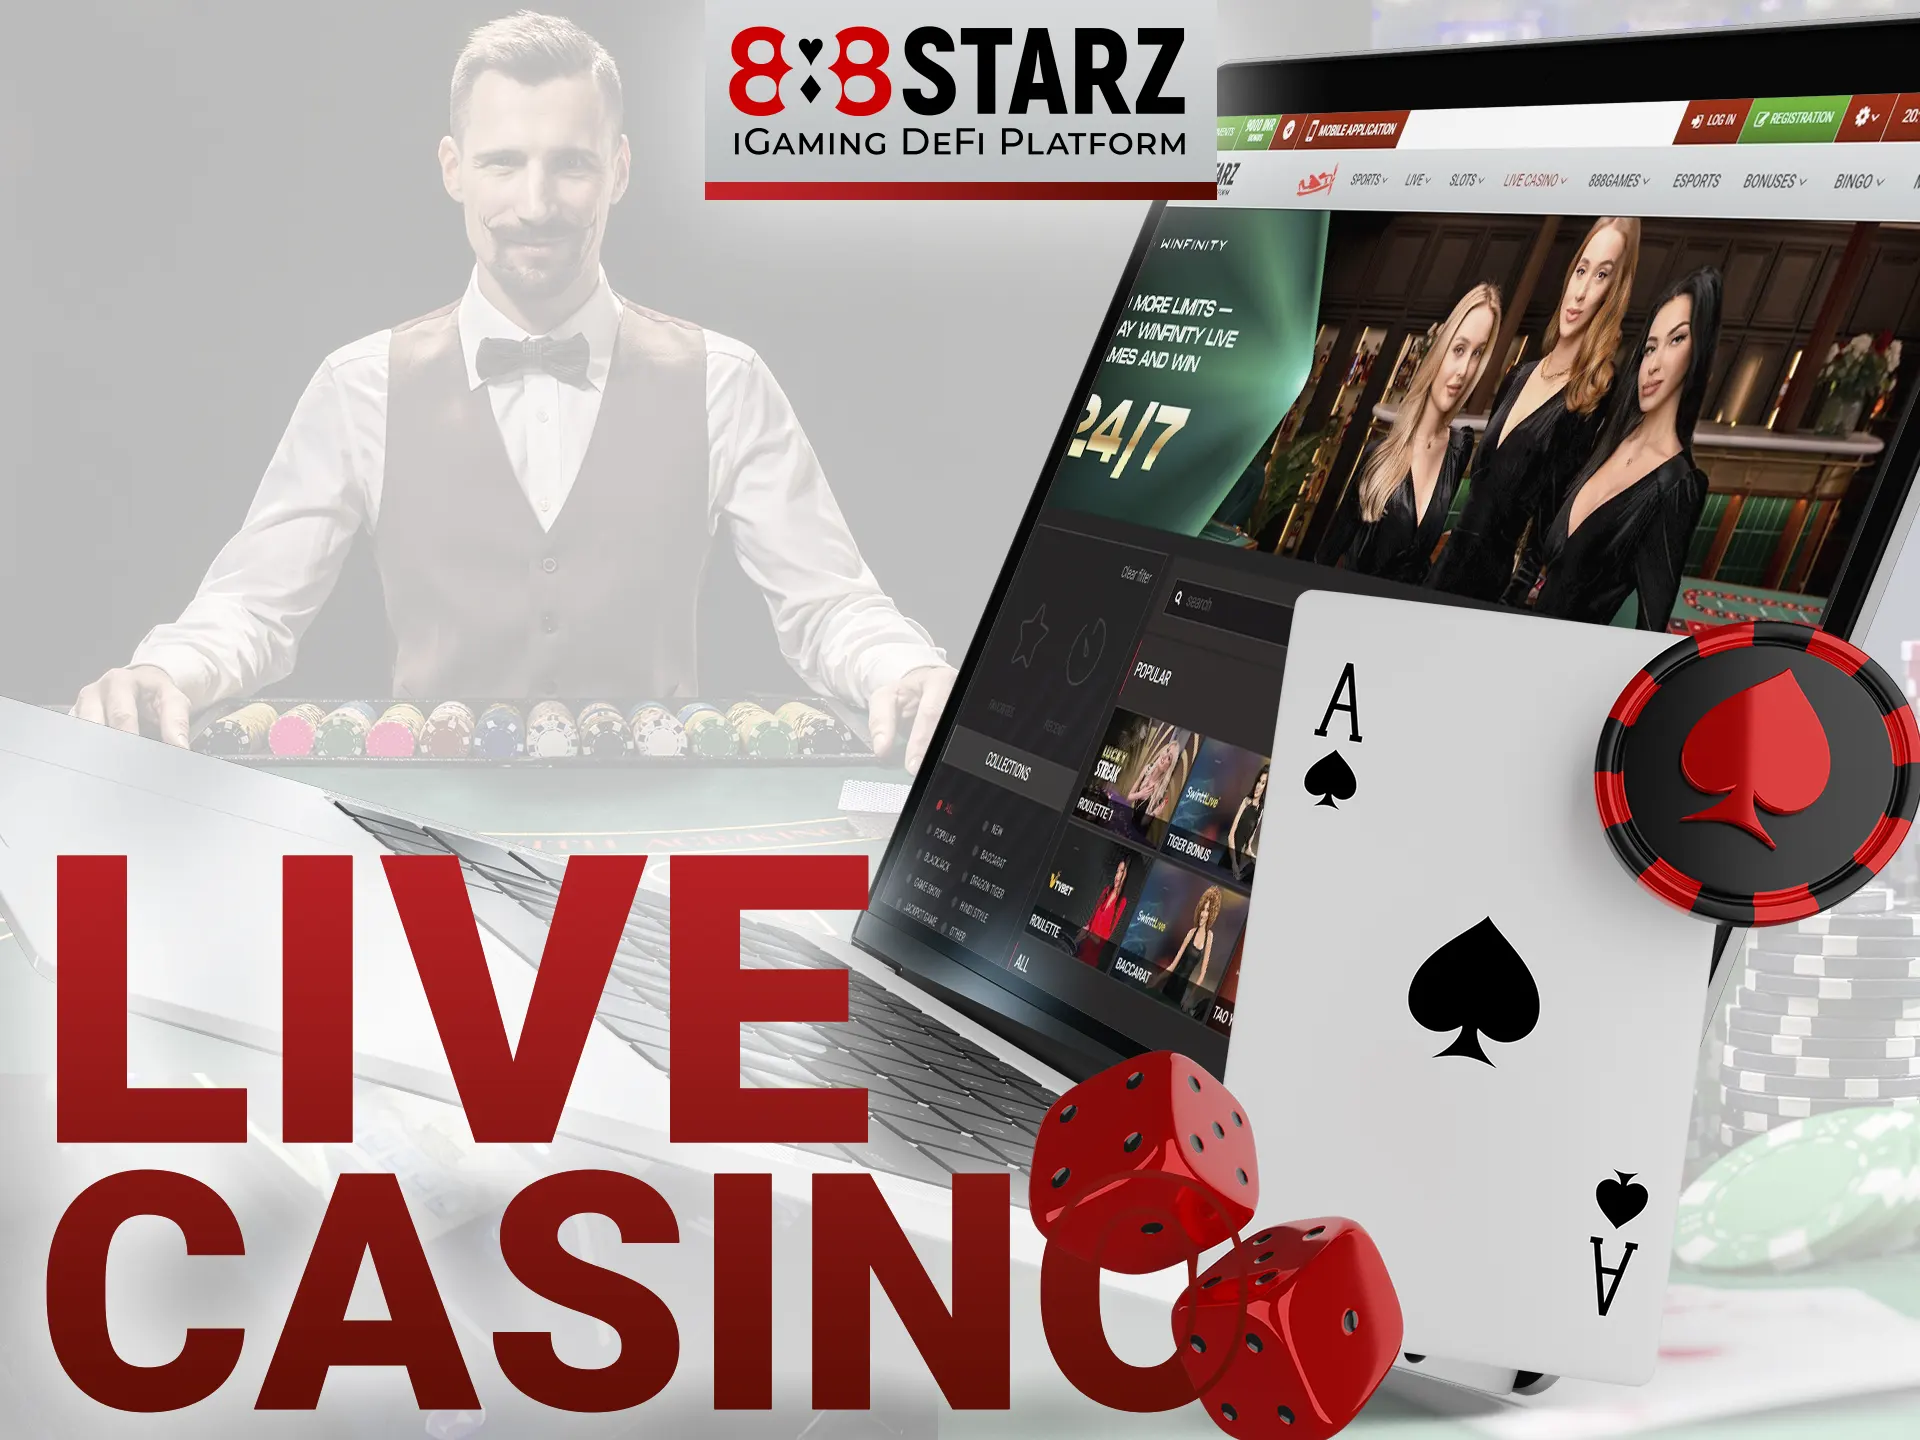 In the Live Casino section of the 888starz website, players can interact with live dealers in real-time.